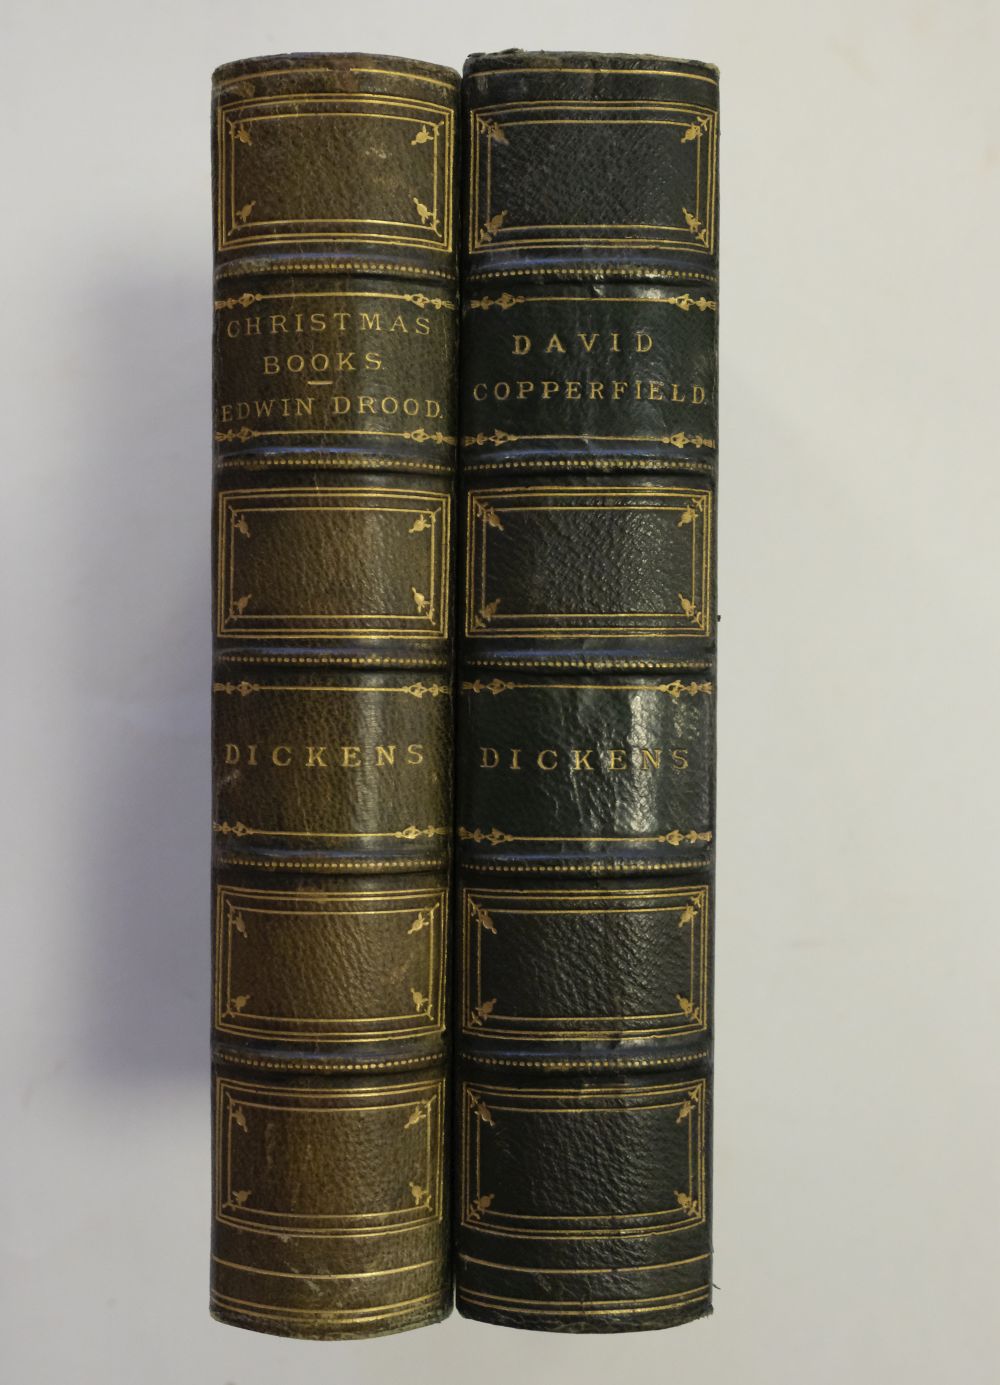 Dickens (Charles). Works, 18 works bound in 13 volumes, Chapman & Hall, circa 1880 - Image 3 of 8